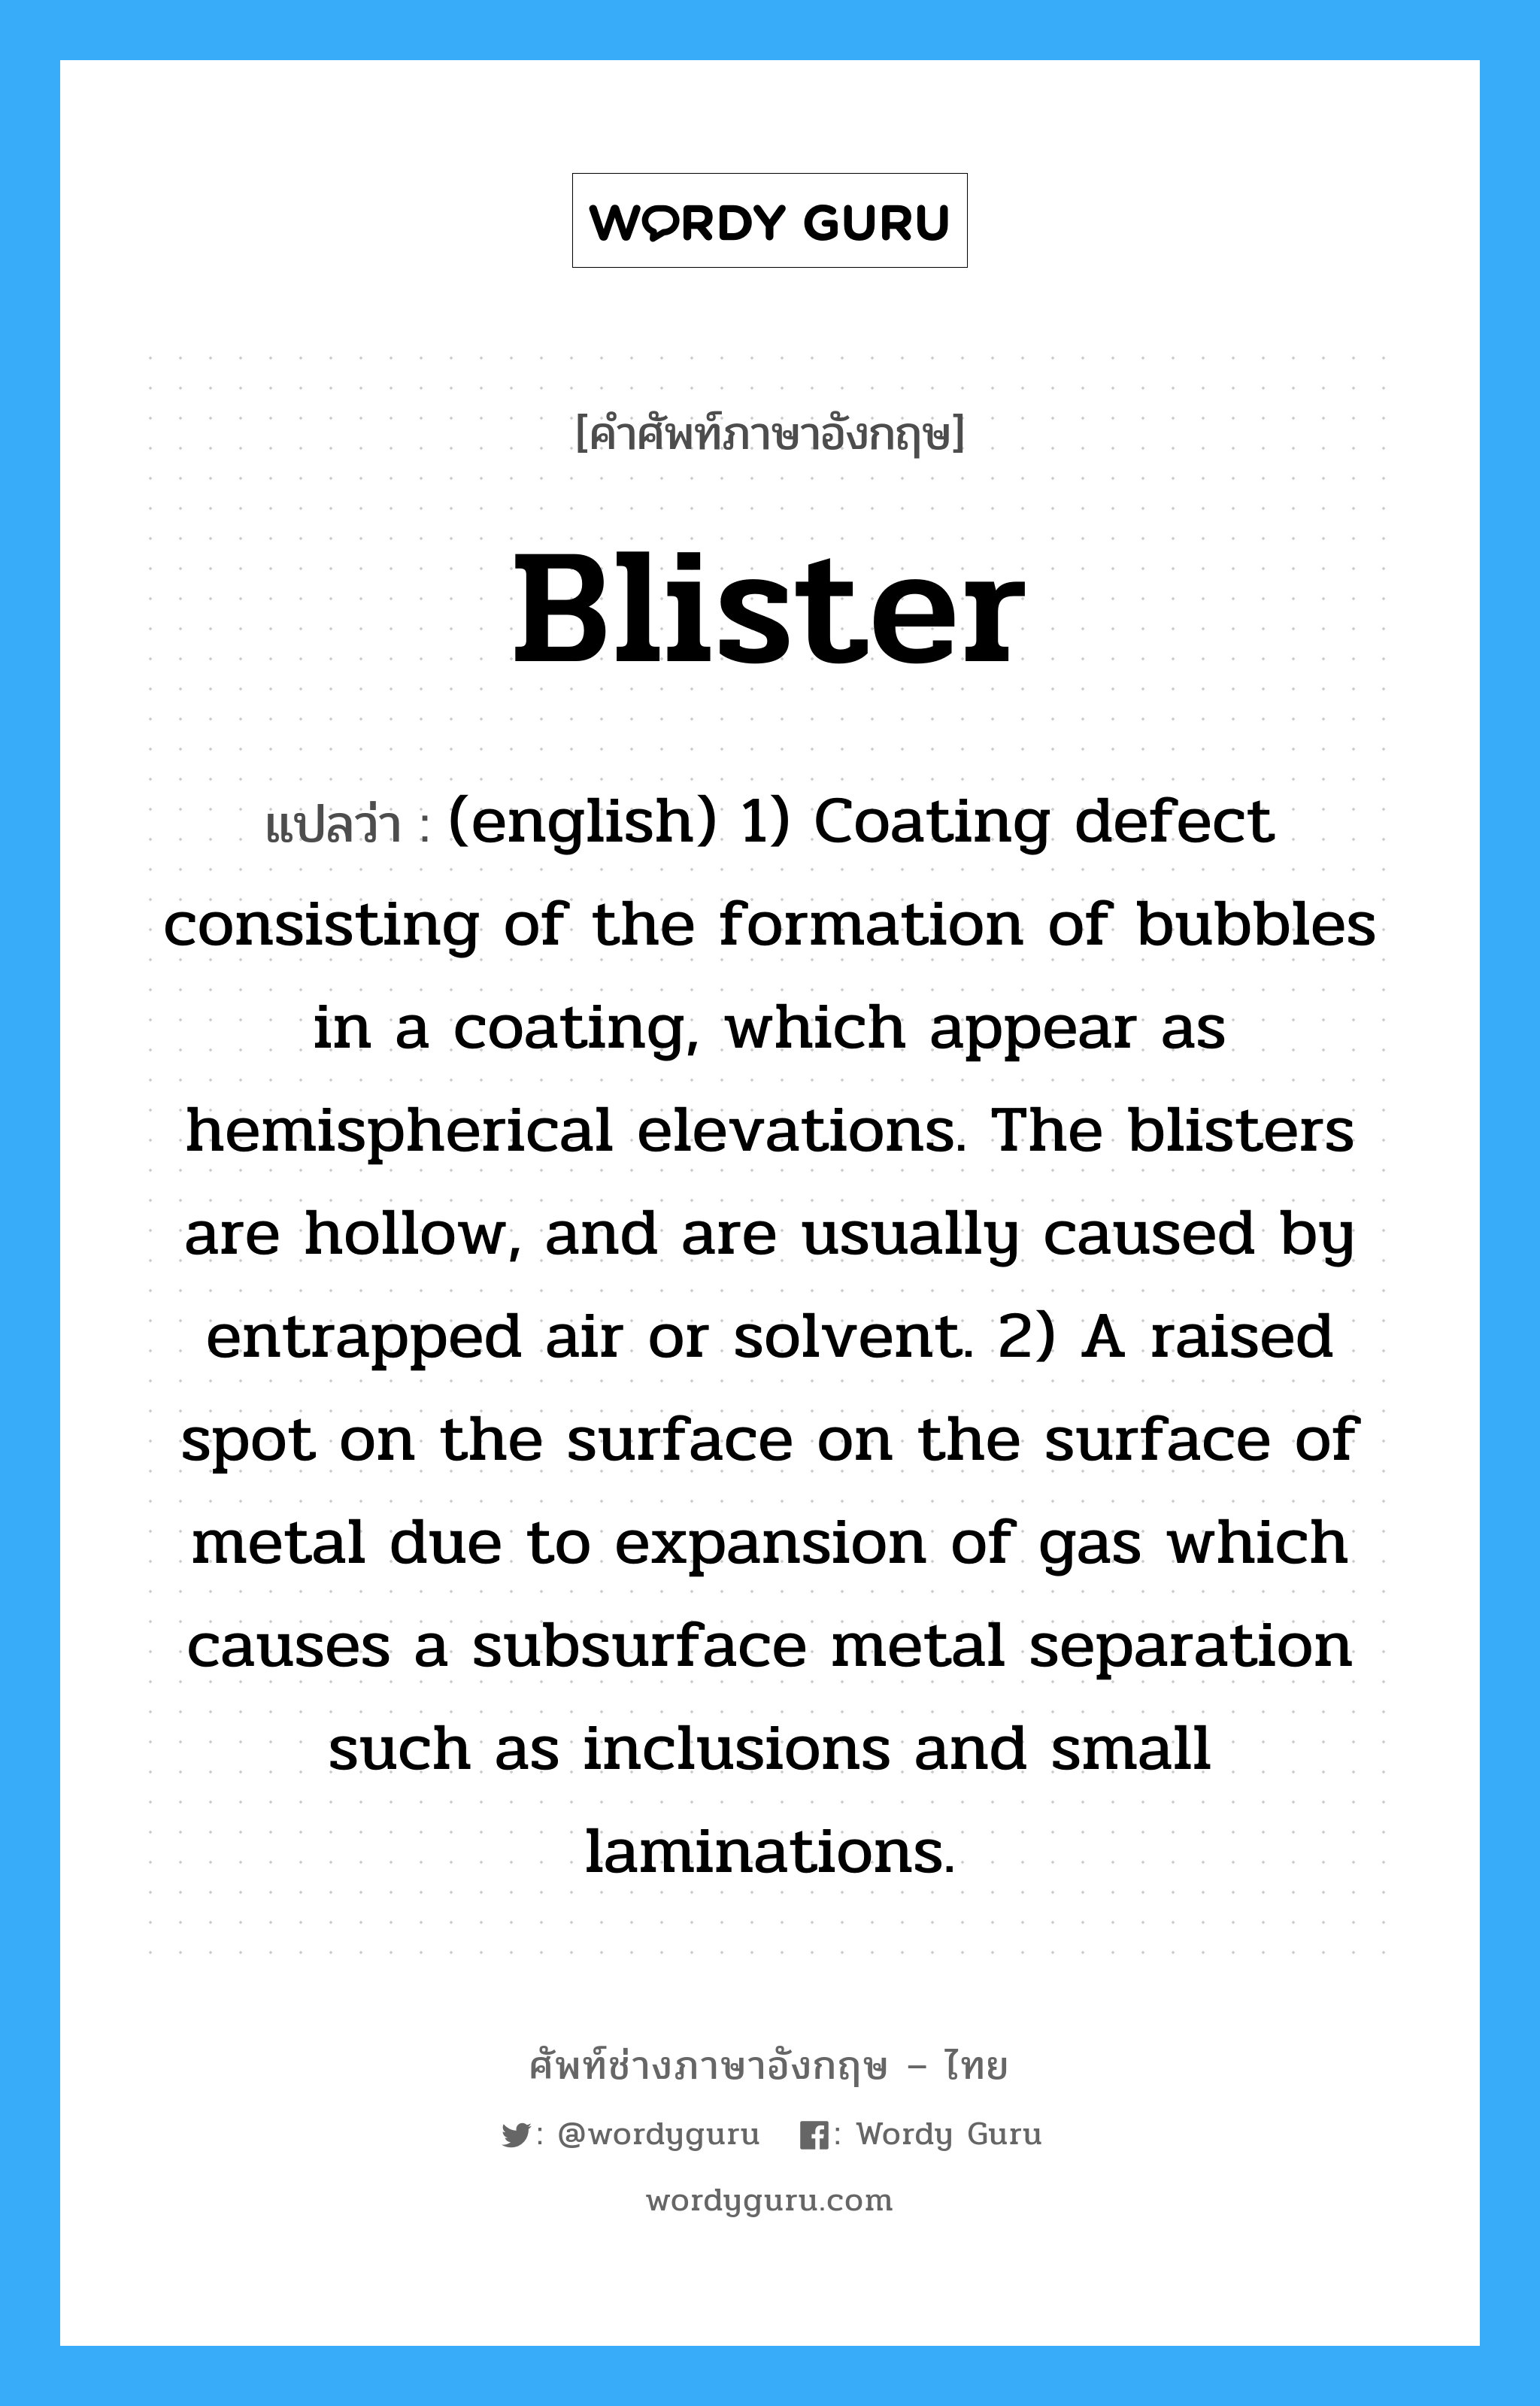 (english) 1) Coating defect consisting of the formation of bubbles in a coating, which appear as hemispherical elevations. The blisters are hollow, and are usually caused by entrapped air or solvent. 2) A raised spot on the surface on the surface of metal due to expansion of gas which causes a subsurface metal separation such as inclusions and small laminations. ภาษาอังกฤษ?, คำศัพท์ช่างภาษาอังกฤษ - ไทย (english) 1) Coating defect consisting of the formation of bubbles in a coating, which appear as hemispherical elevations. The blisters are hollow, and are usually caused by entrapped air or solvent. 2) A raised spot on the surface on the surface of metal due to expansion of gas which causes a subsurface metal separation such as inclusions and small laminations. คำศัพท์ภาษาอังกฤษ (english) 1) Coating defect consisting of the formation of bubbles in a coating, which appear as hemispherical elevations. The blisters are hollow, and are usually caused by entrapped air or solvent. 2) A raised spot on the surface on the surface of metal due to expansion of gas which causes a subsurface metal separation such as inclusions and small laminations. แปลว่า Blister